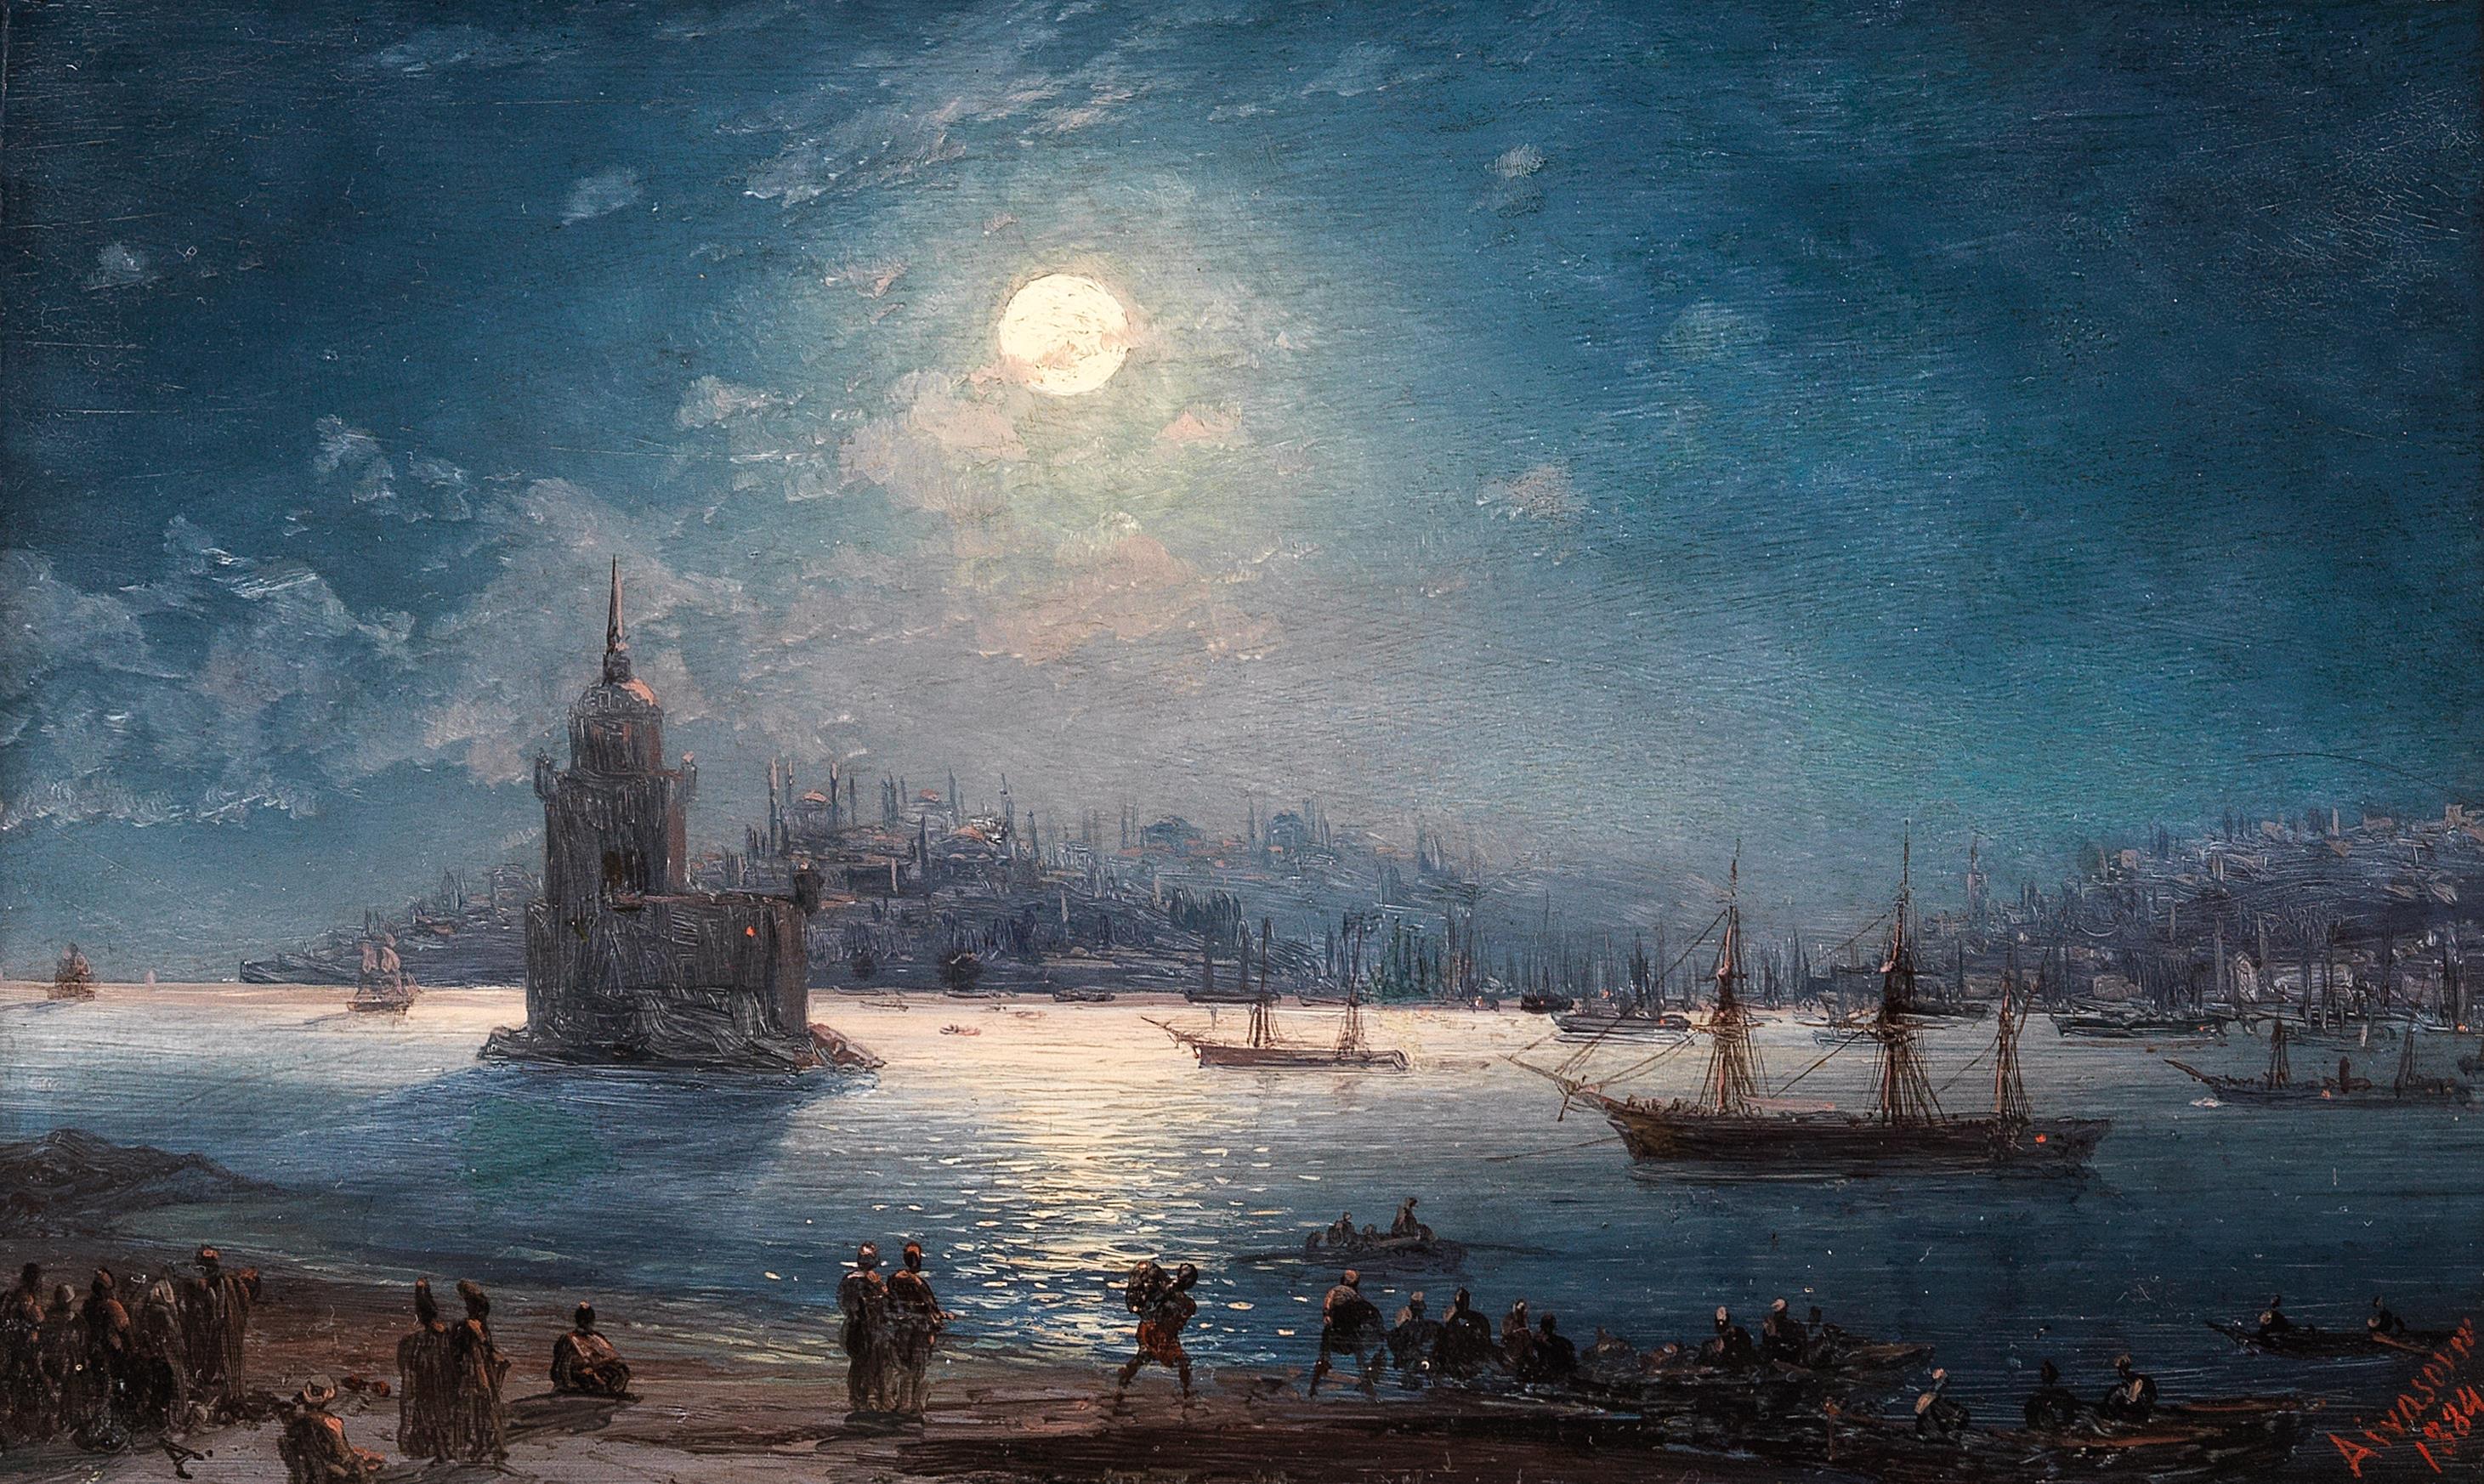 File:Ivan Konstantinovich Aivazovsky - A View of the Bosporus with 